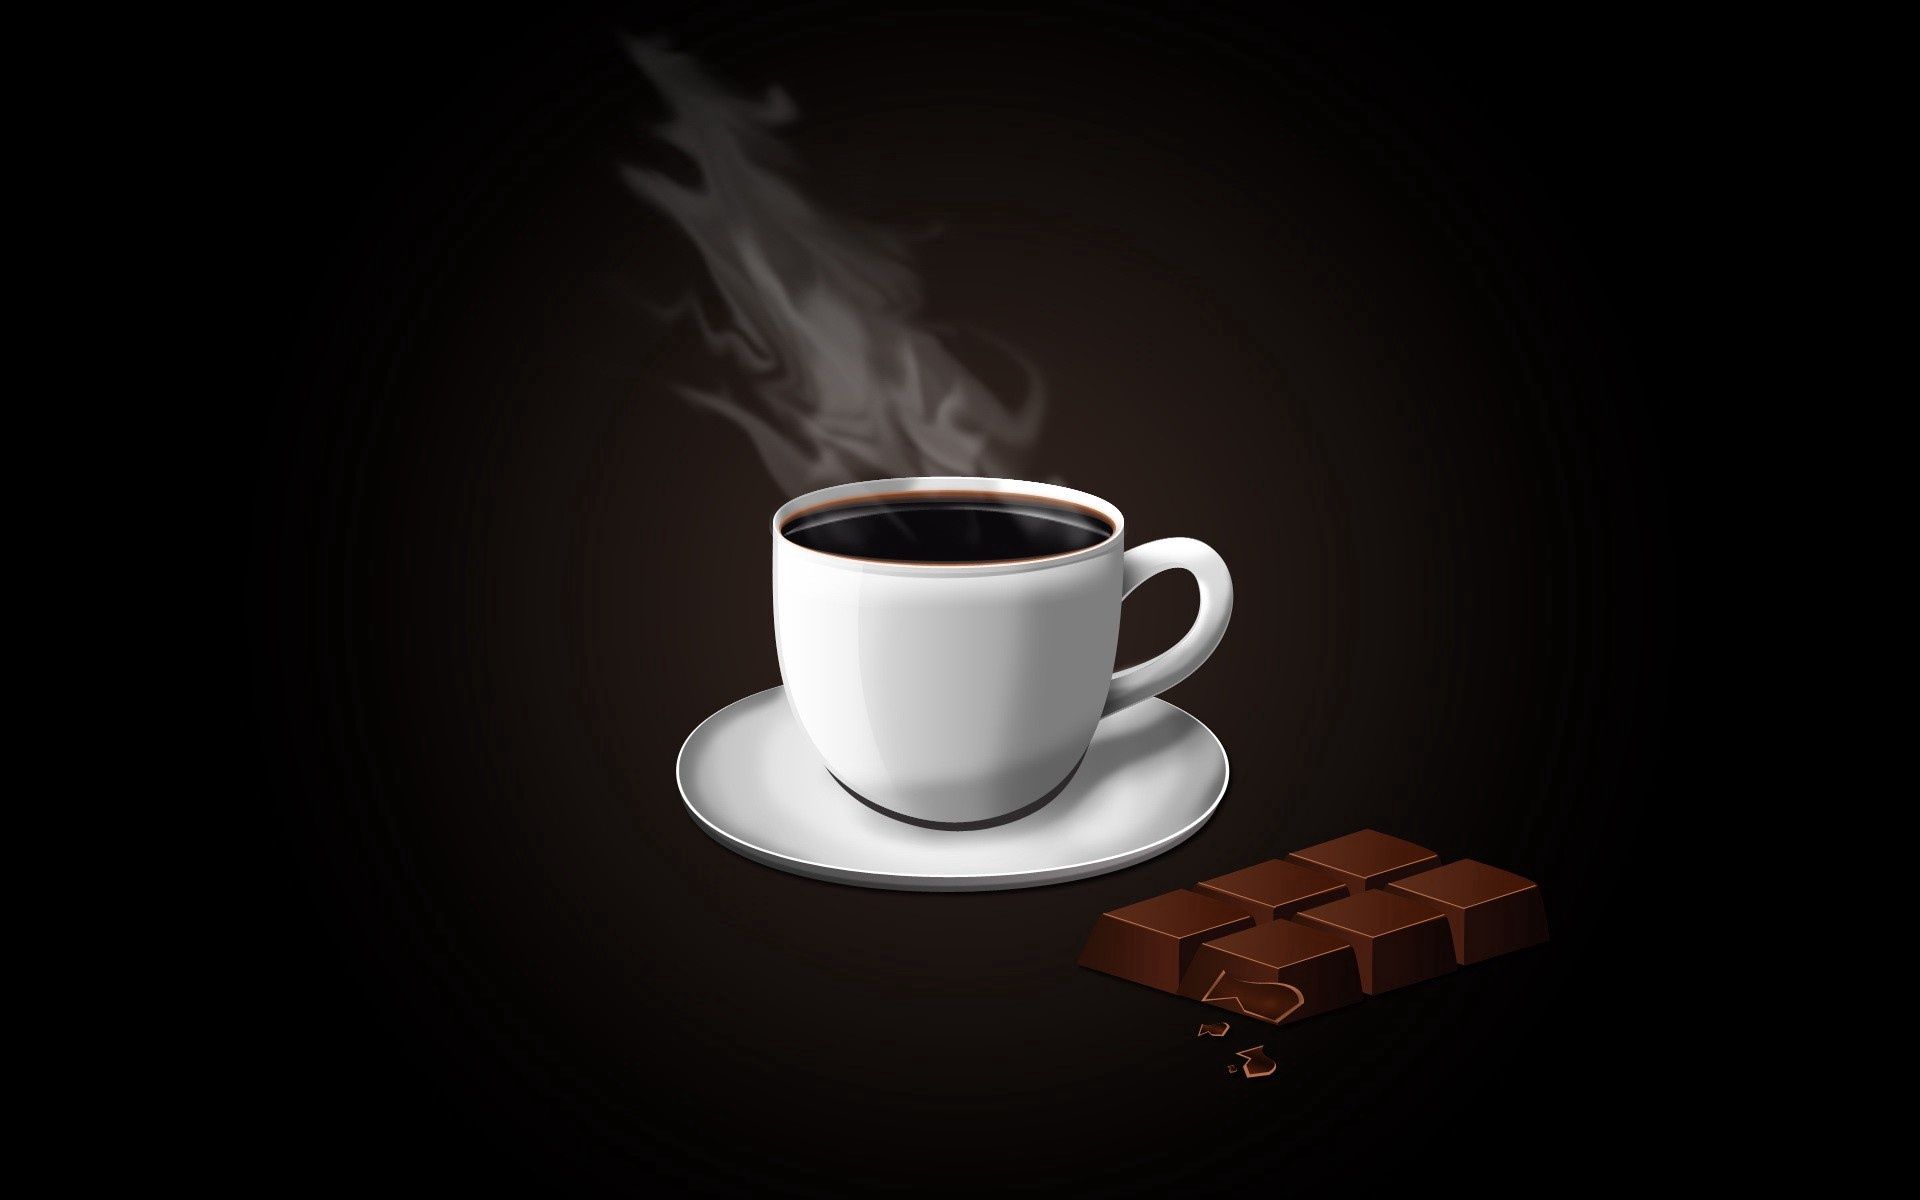 51434 download wallpaper coffee, chocolate, vector, cup, plate, steam screensavers and pictures for free